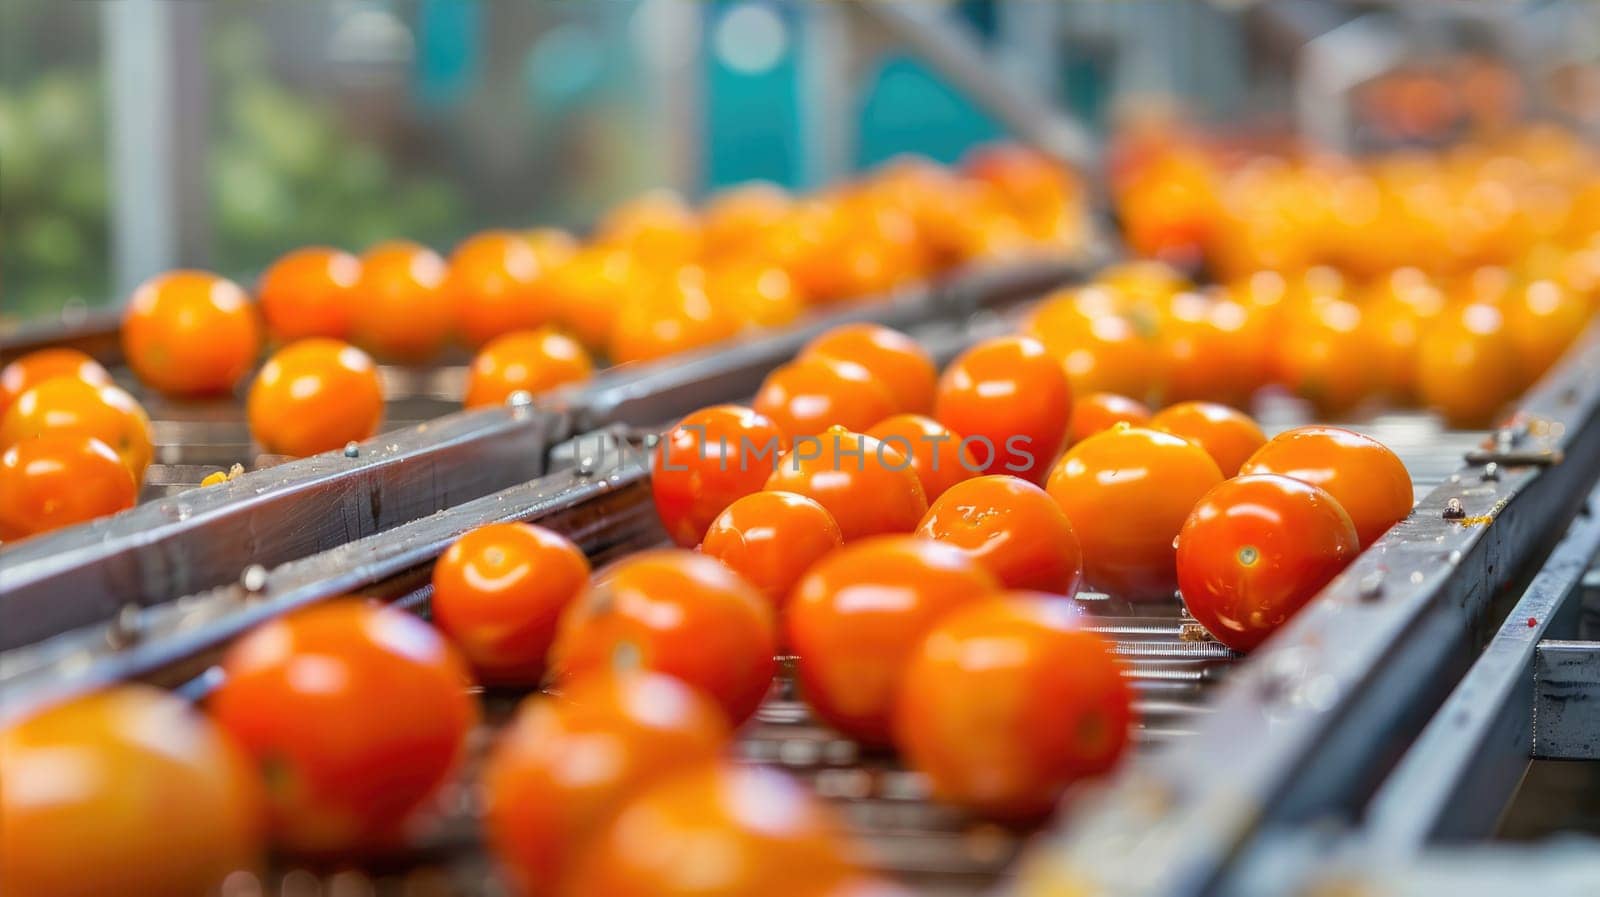 Plum tomatoes are being processed on a conveyor belt in a food factory to become ingredients for various recipes and cuisines AI